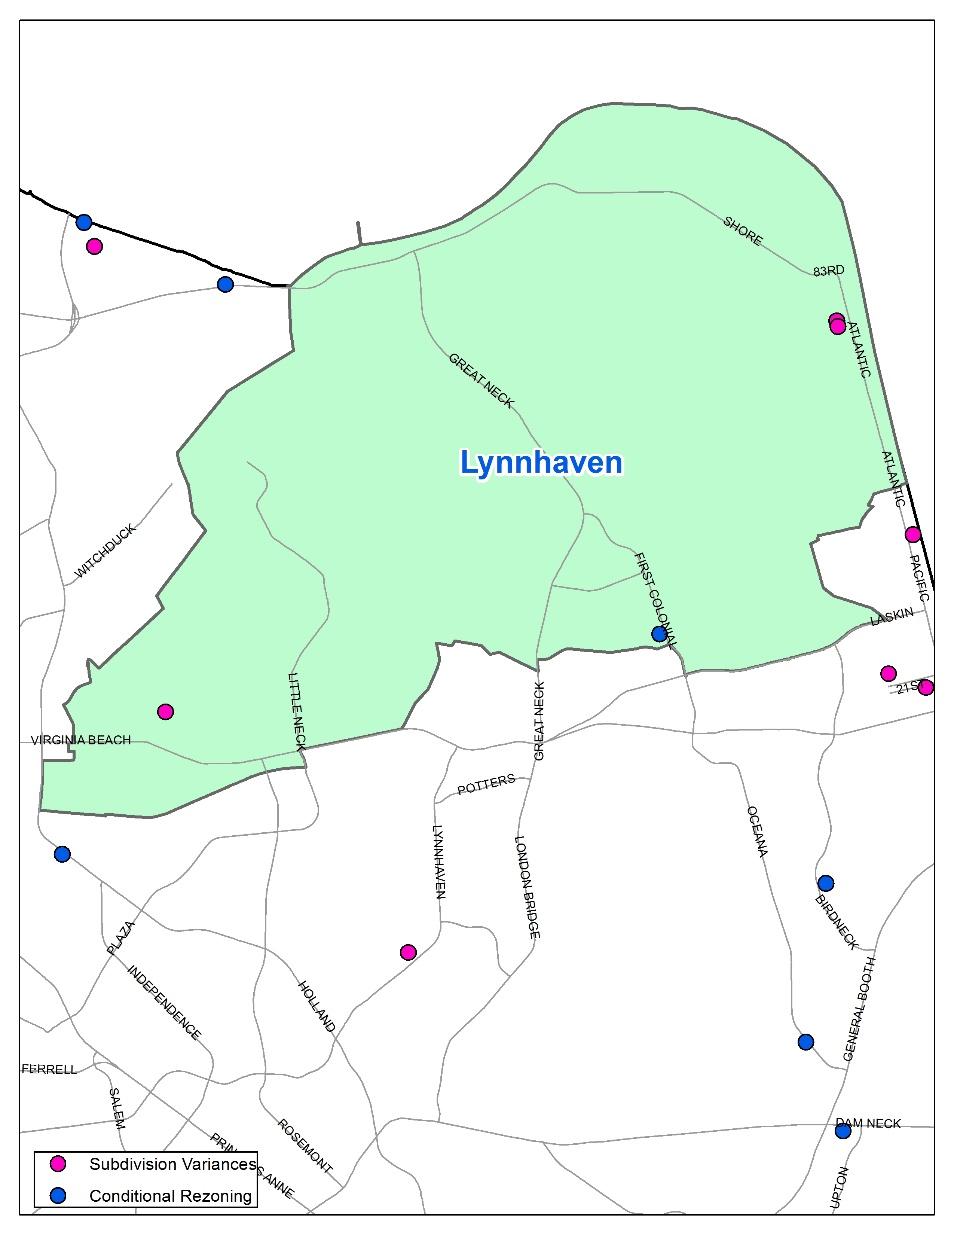 Lynnhaven 5 Subdivision Variances 3 Dimensional Requirements 2